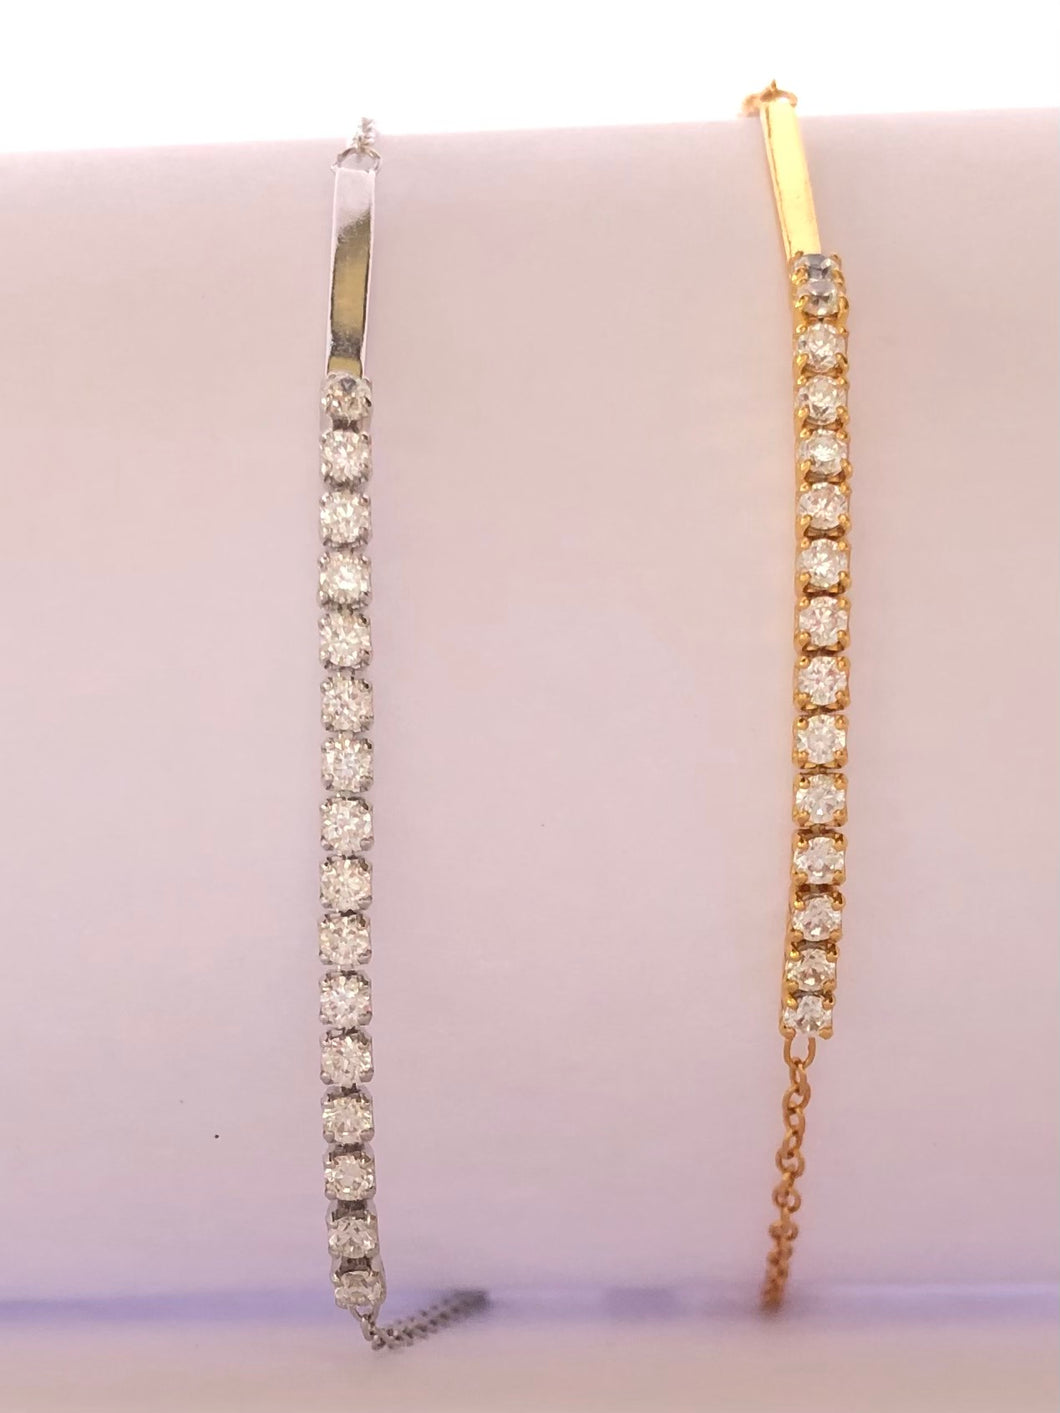 Simple Diamond Chain Bracelet 925 Sterling Silver with platinum or 18K gold plating     Diamonds are AAAA cubic zirconia     Two sizes available 6.5 or 7.5 inches long plus extender